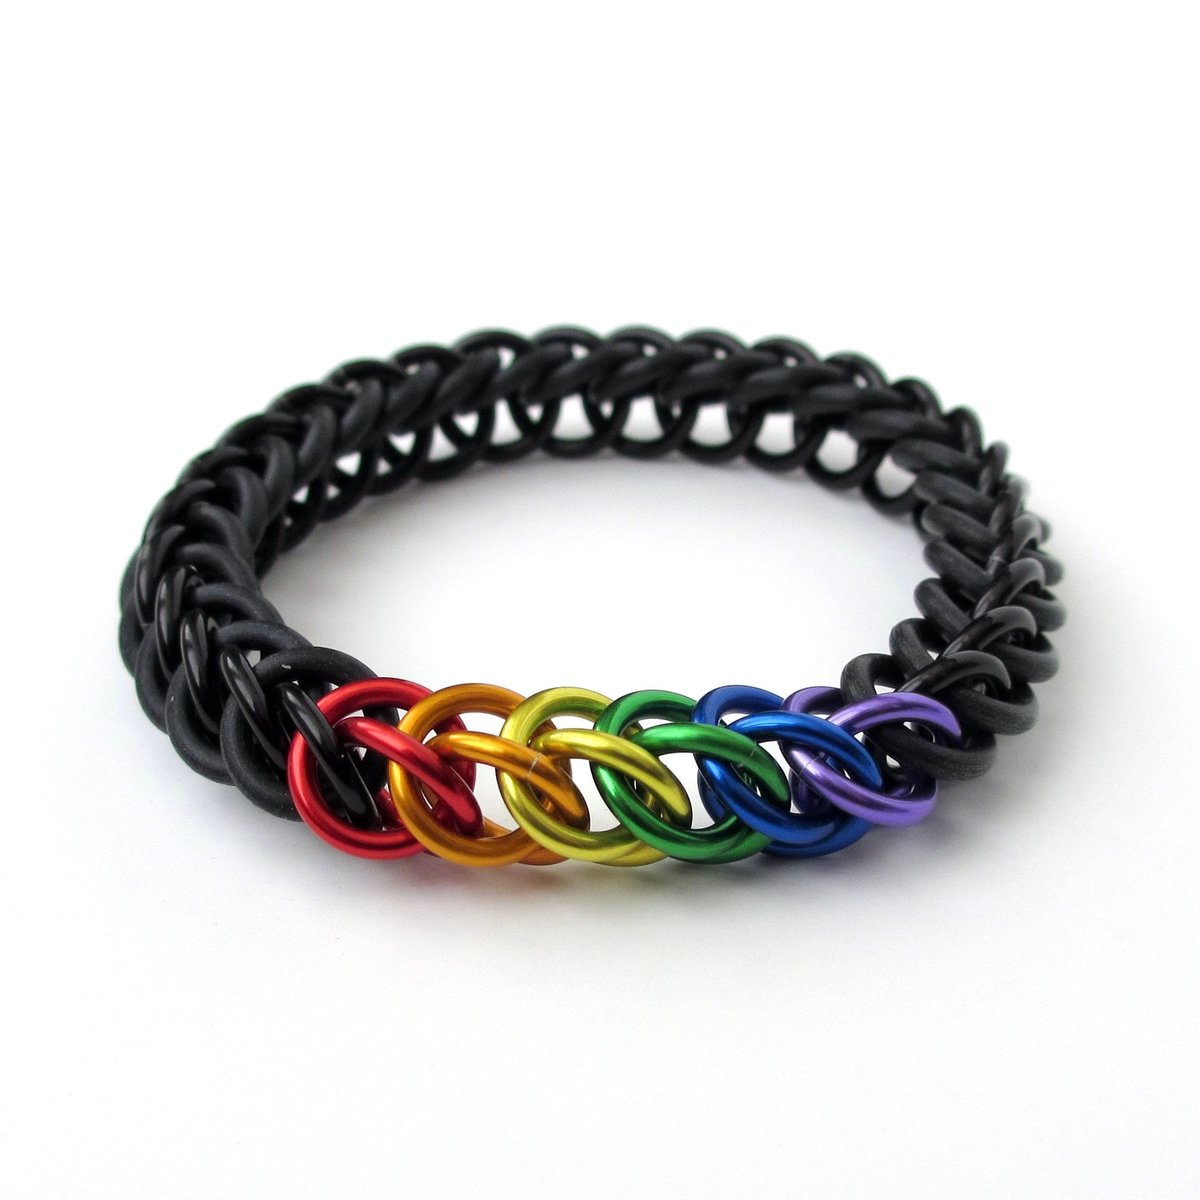 Gay pride stretchy bracelet, chainmail half Persian 3 in 1 weave, discreet rainbow flag LGBTQIA gifts